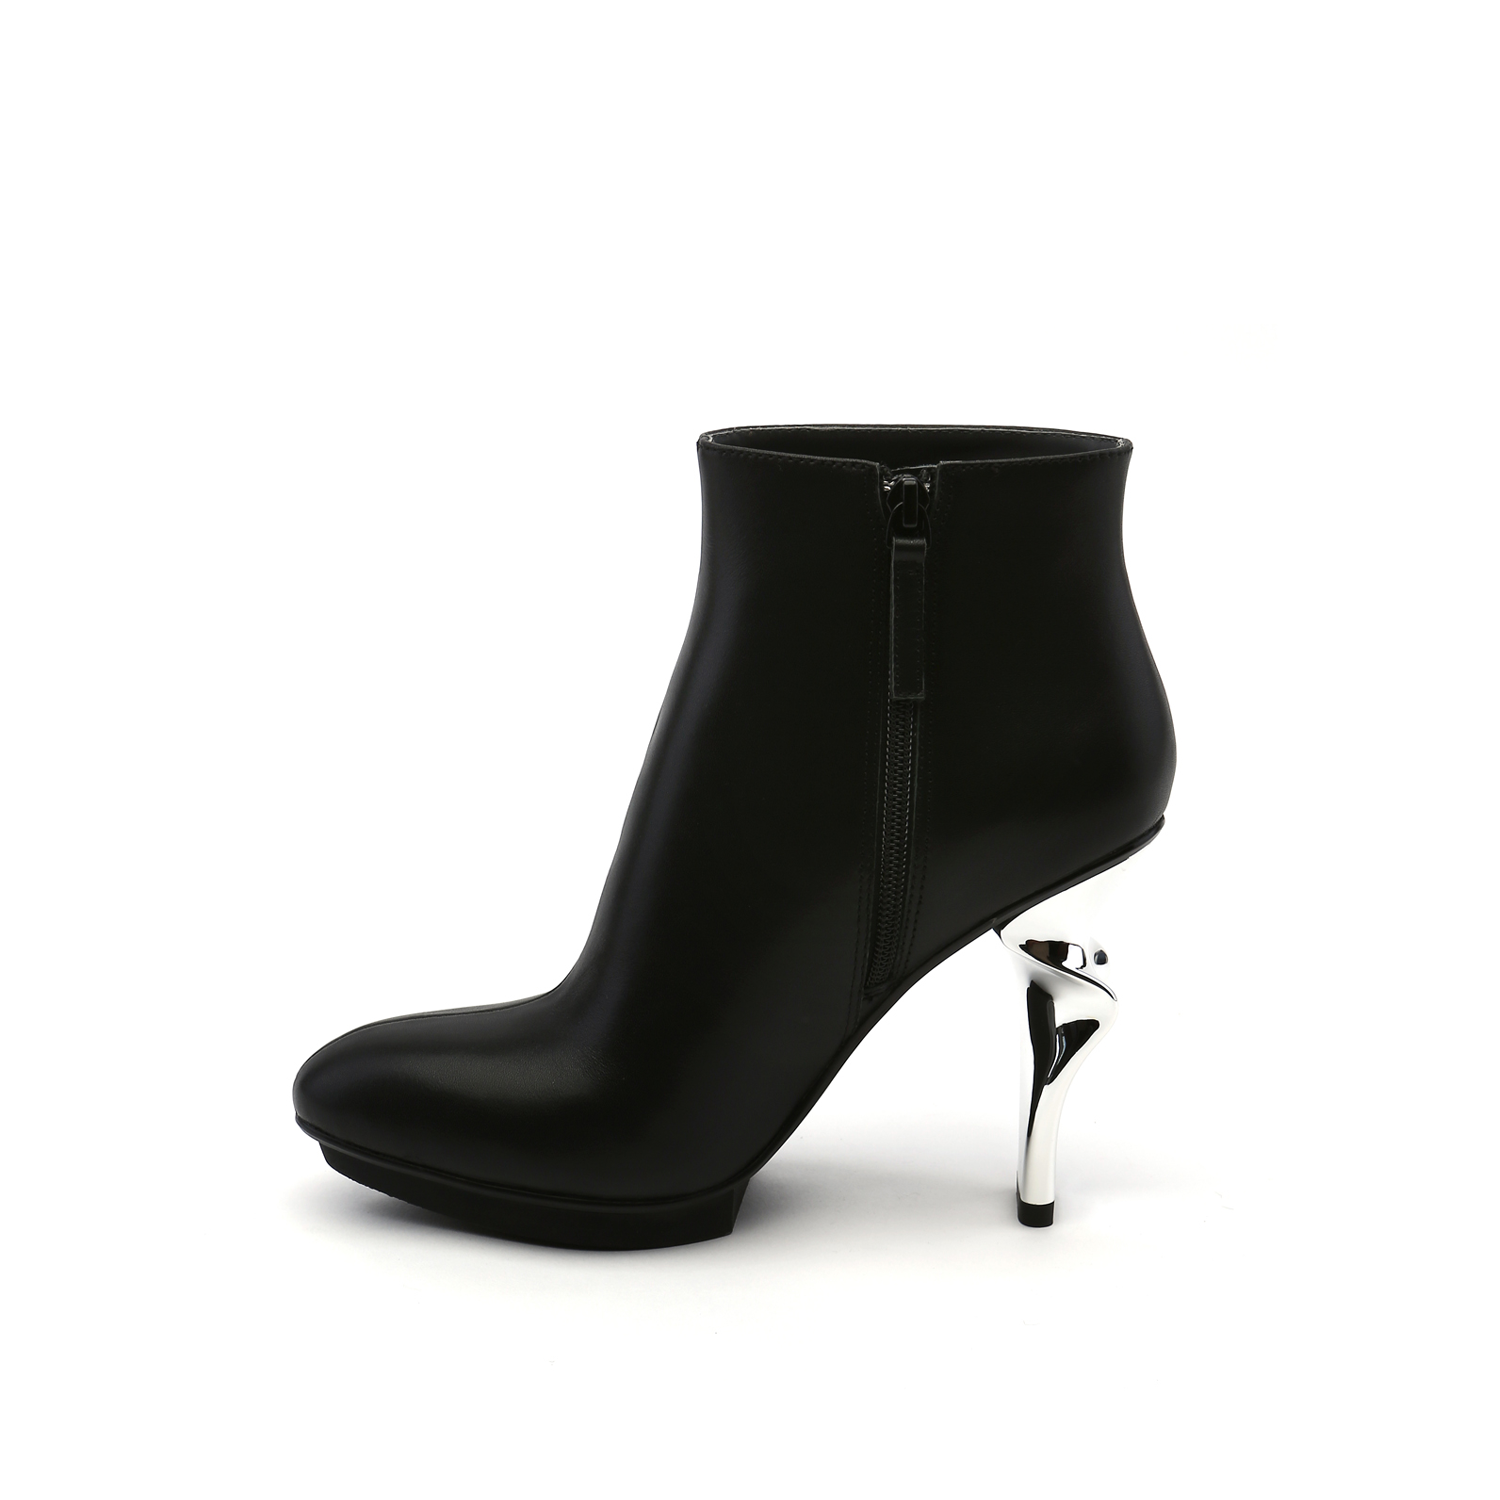 inner side view of the united nude twirl bootie. This bootie is black with a metallic spiraling high heel and an inner zipper.